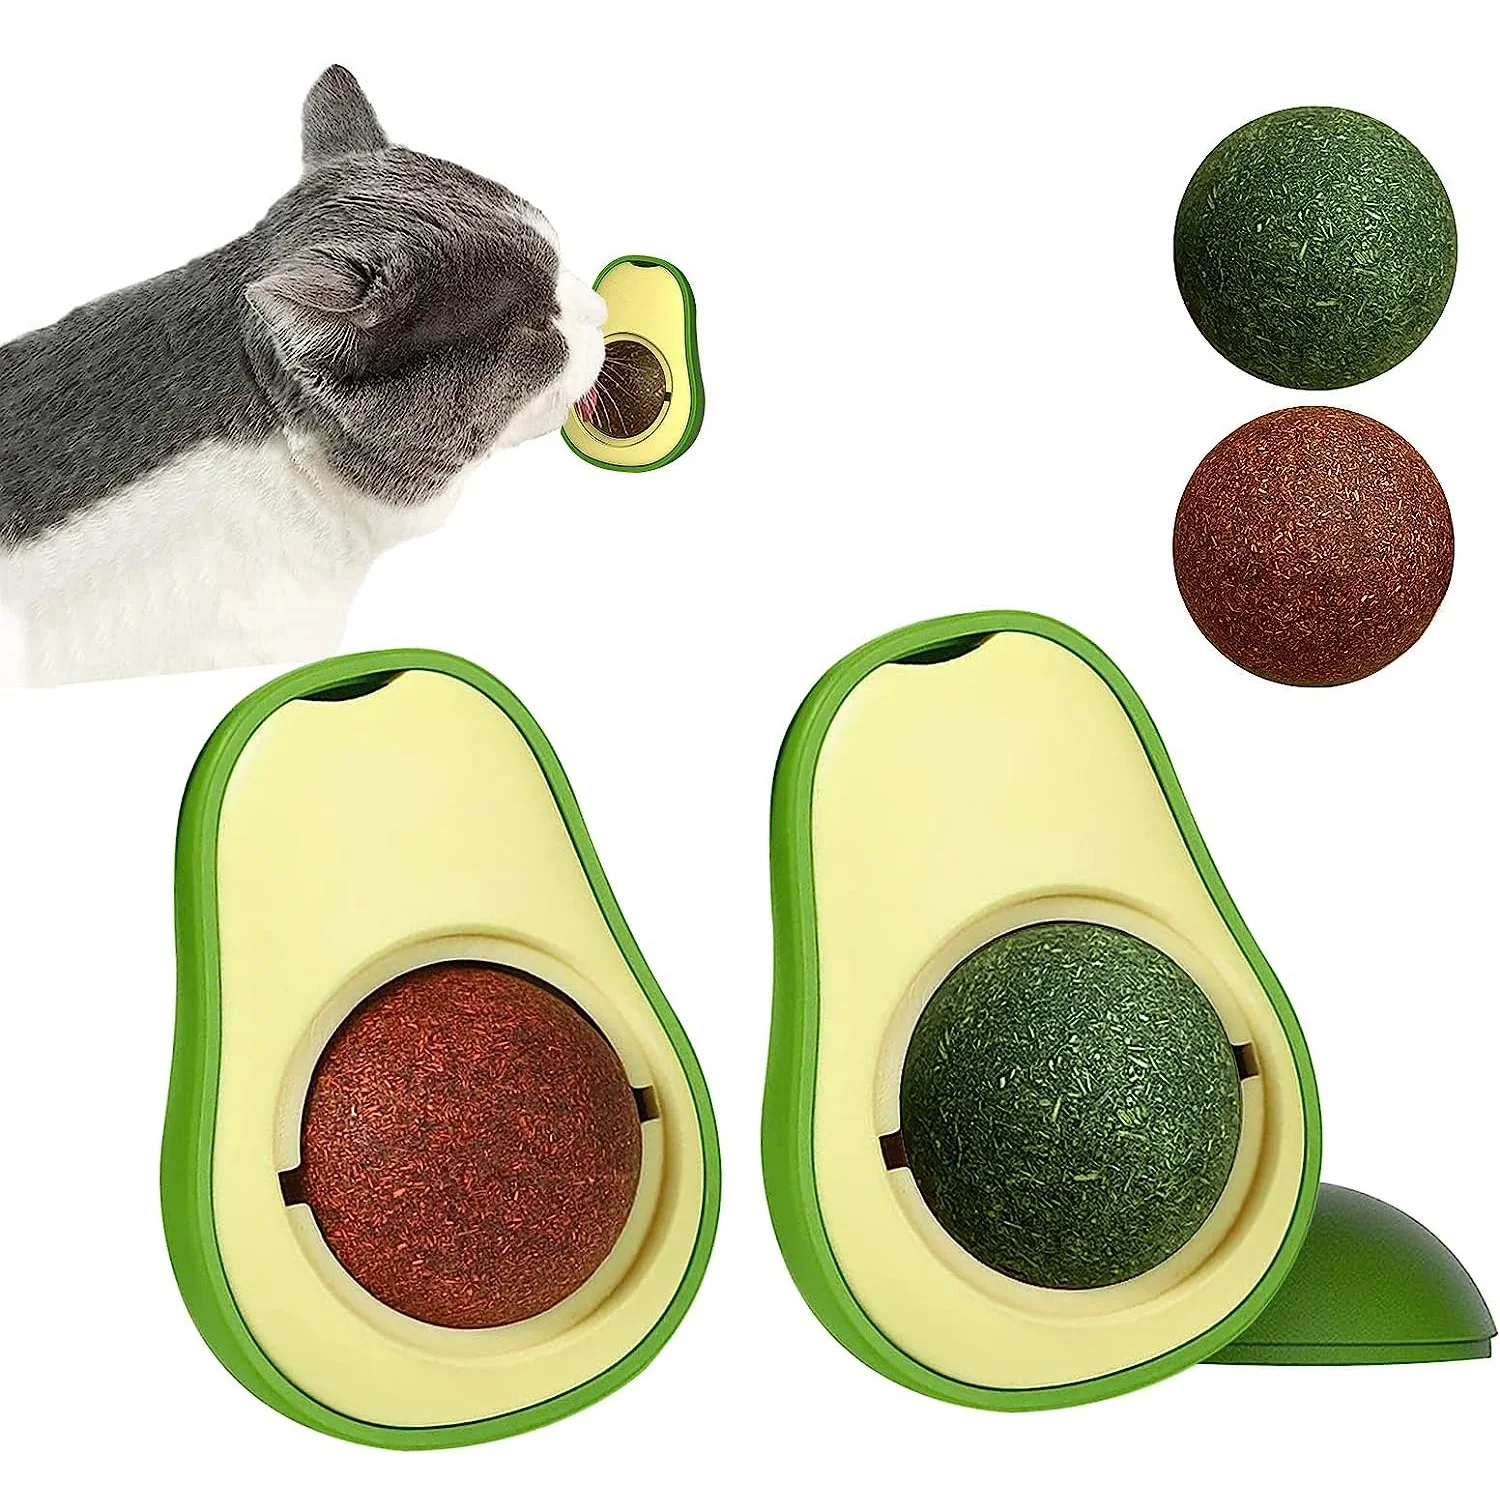 

2PCS Avocado Catnips Wall Ball Rotatable Pet Toy Ball Natural Mint Balls Healthy Edible Licking Balls Snack For Kittens Cat Toys